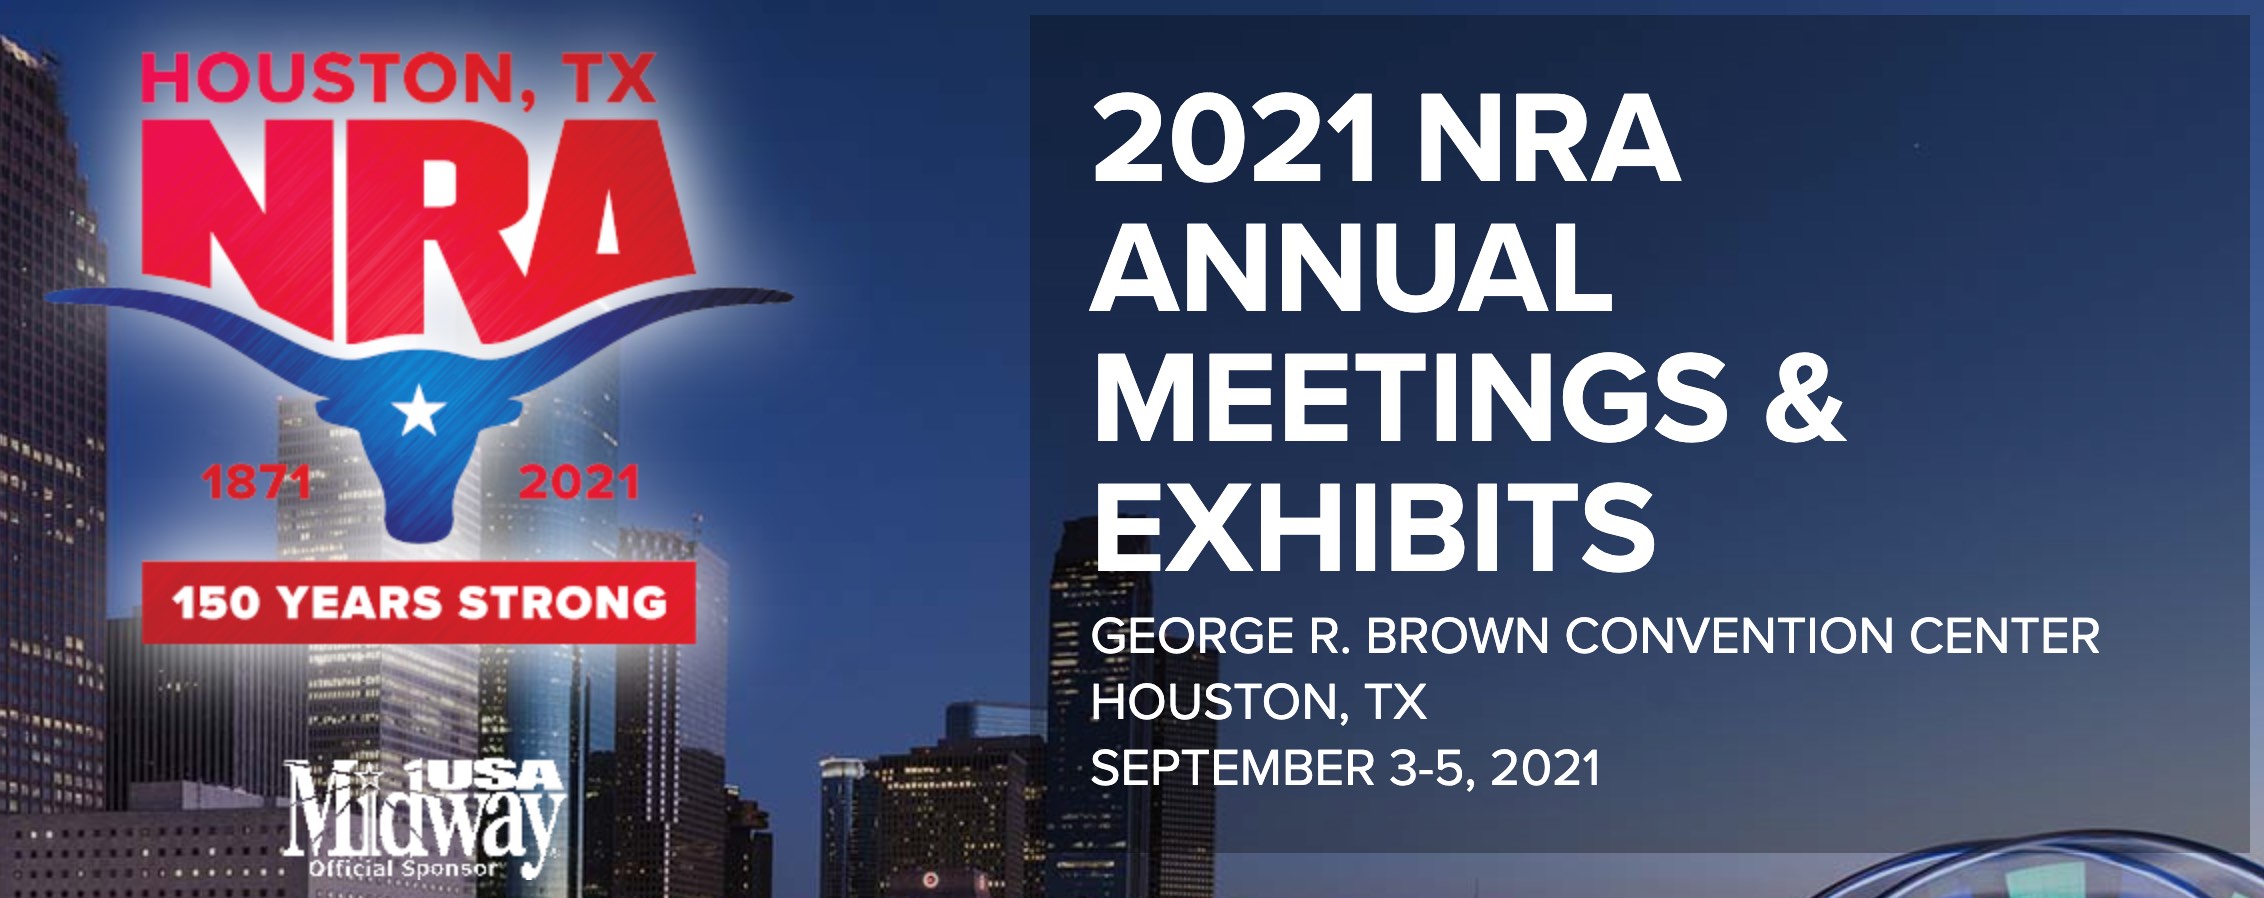 NRA Annual Meeting, Planned For Nashville, Tennessee April 16 19